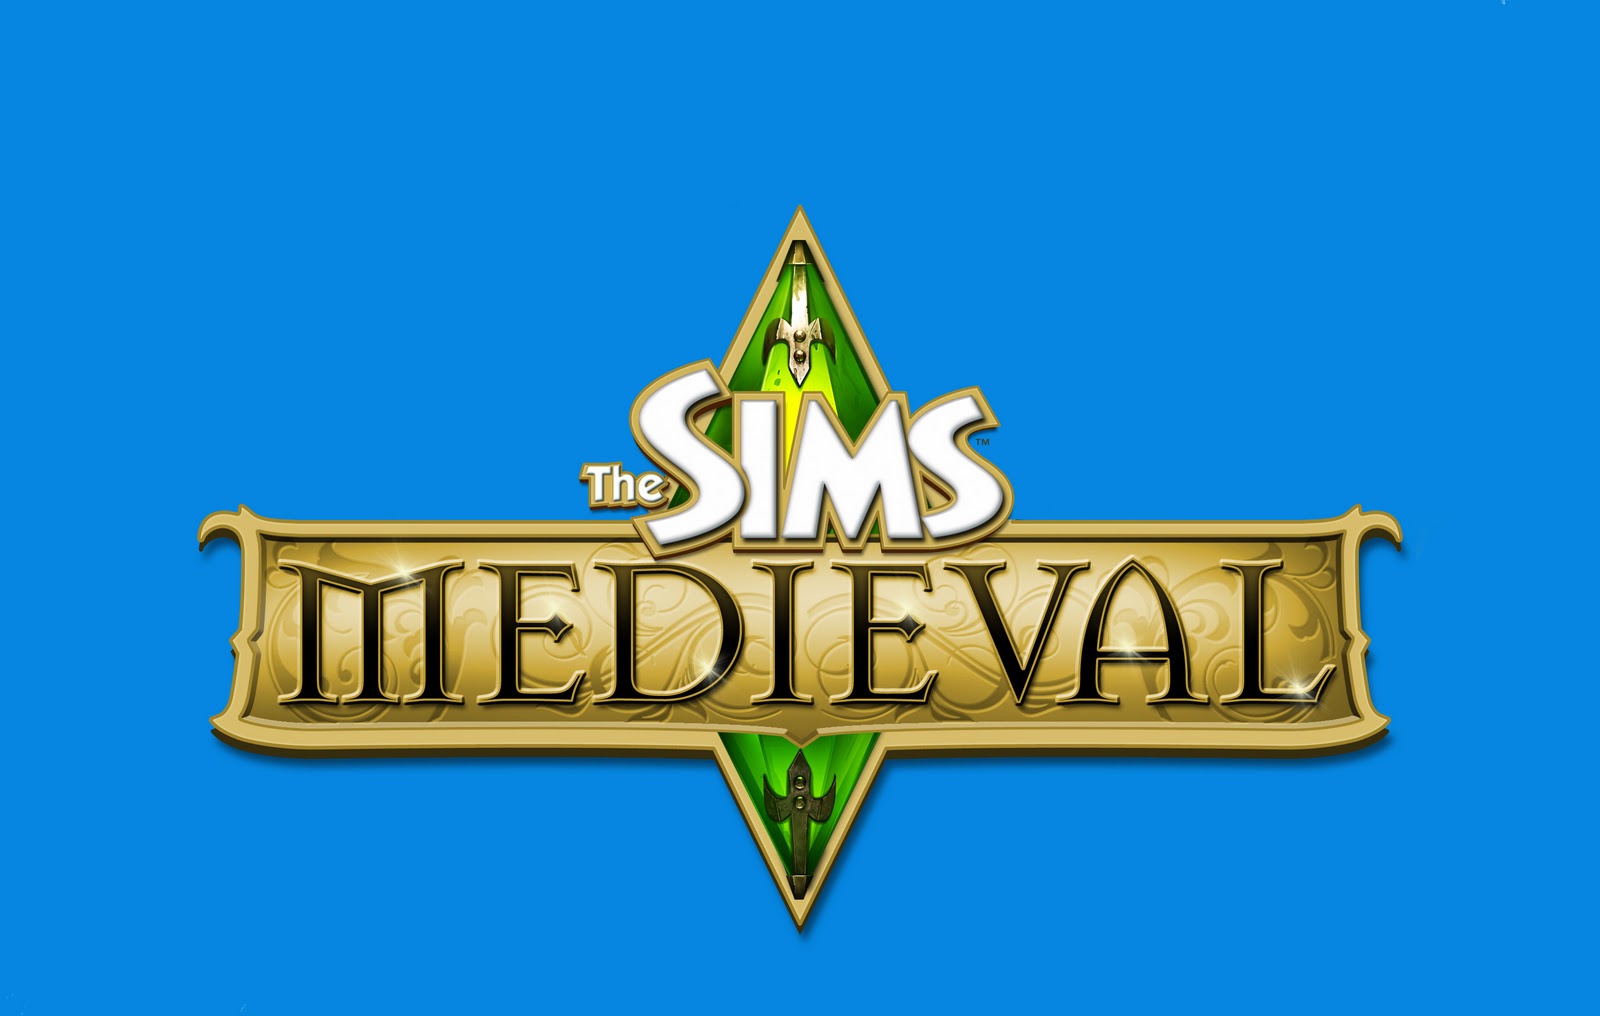 The Sims Medieval HD Wallpapers Desktop Wallpapers